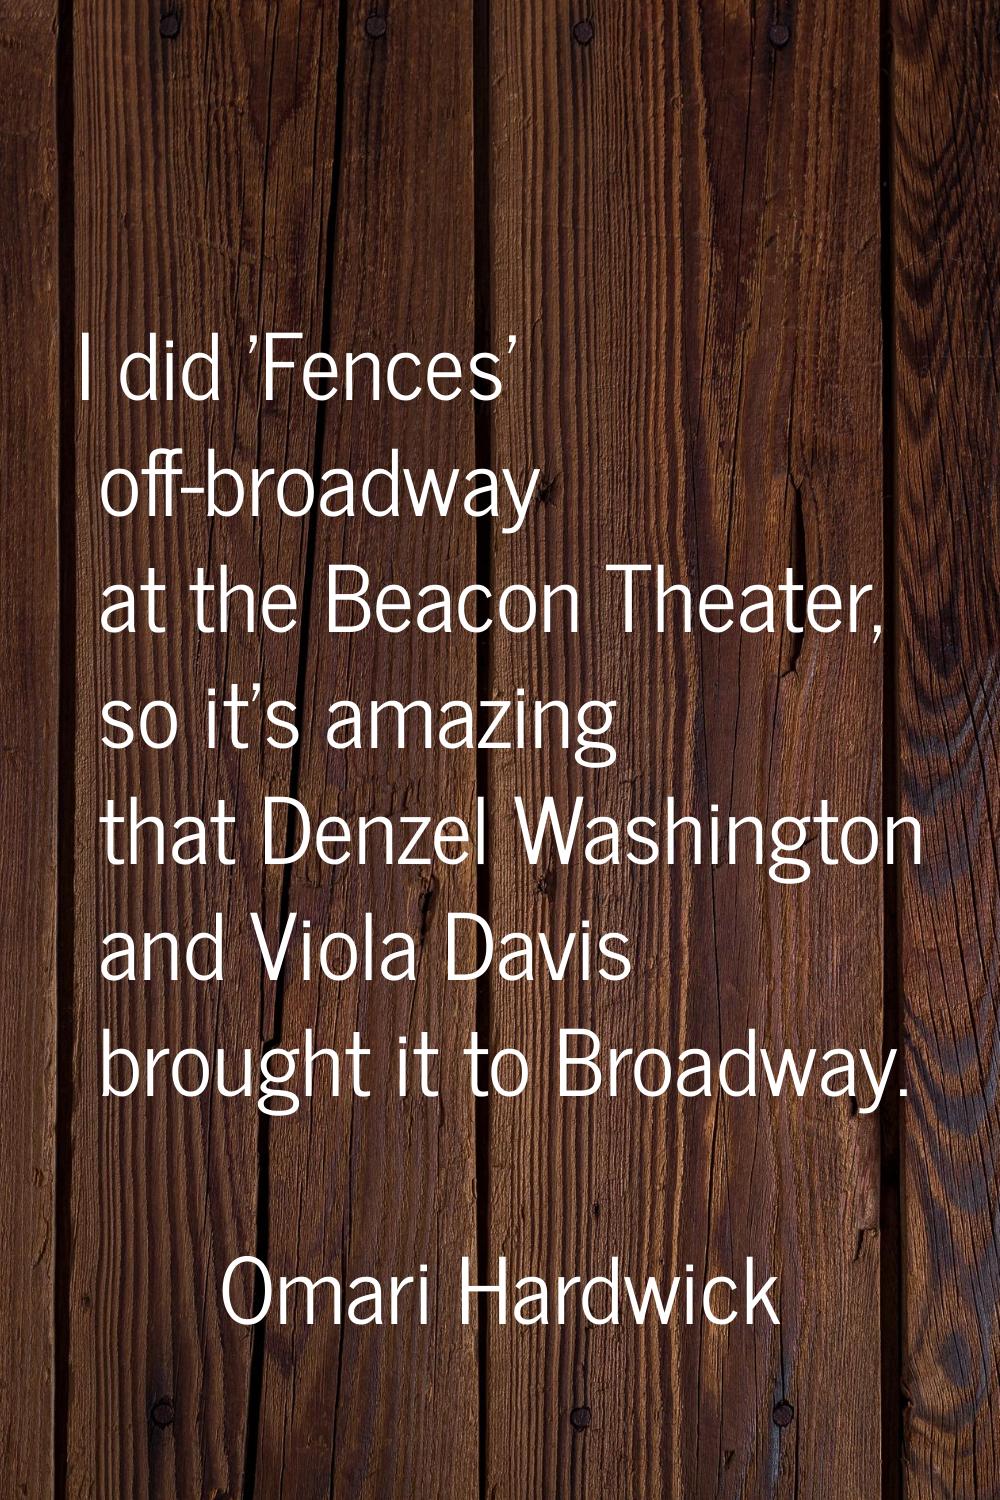 I did 'Fences' off-broadway at the Beacon Theater, so it's amazing that Denzel Washington and Viola